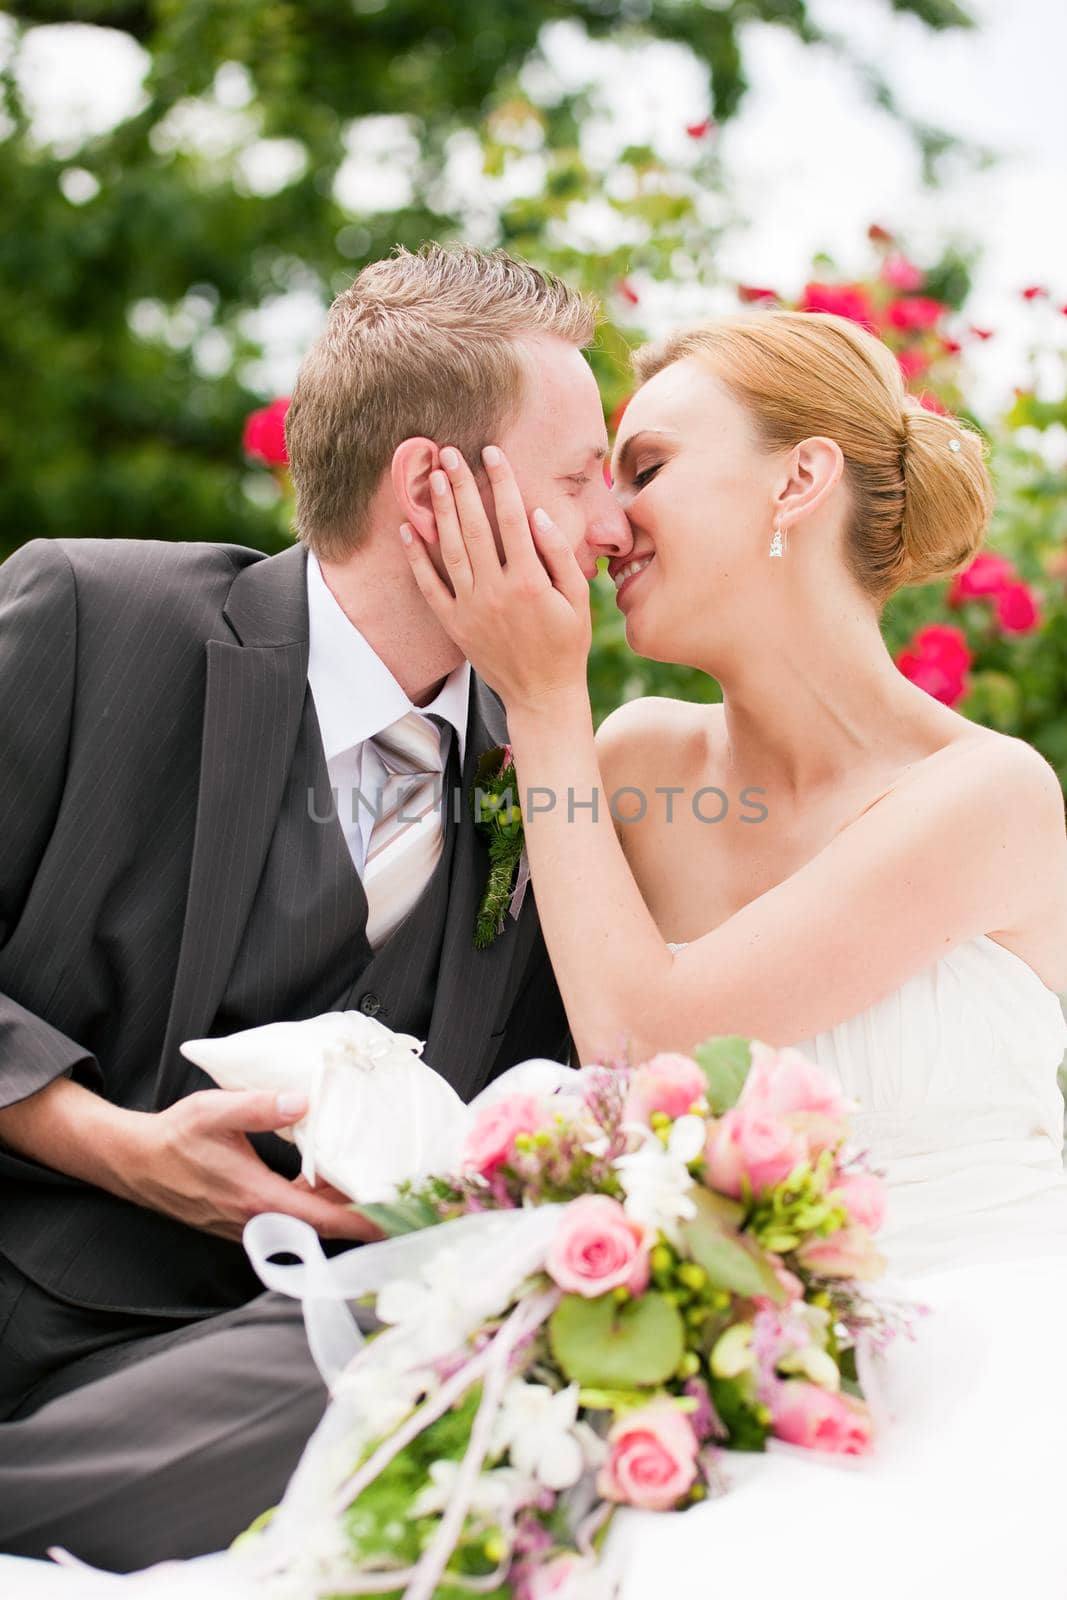 Wedding - groom kissing the bride in a park, he is holding the rings, roses in the background